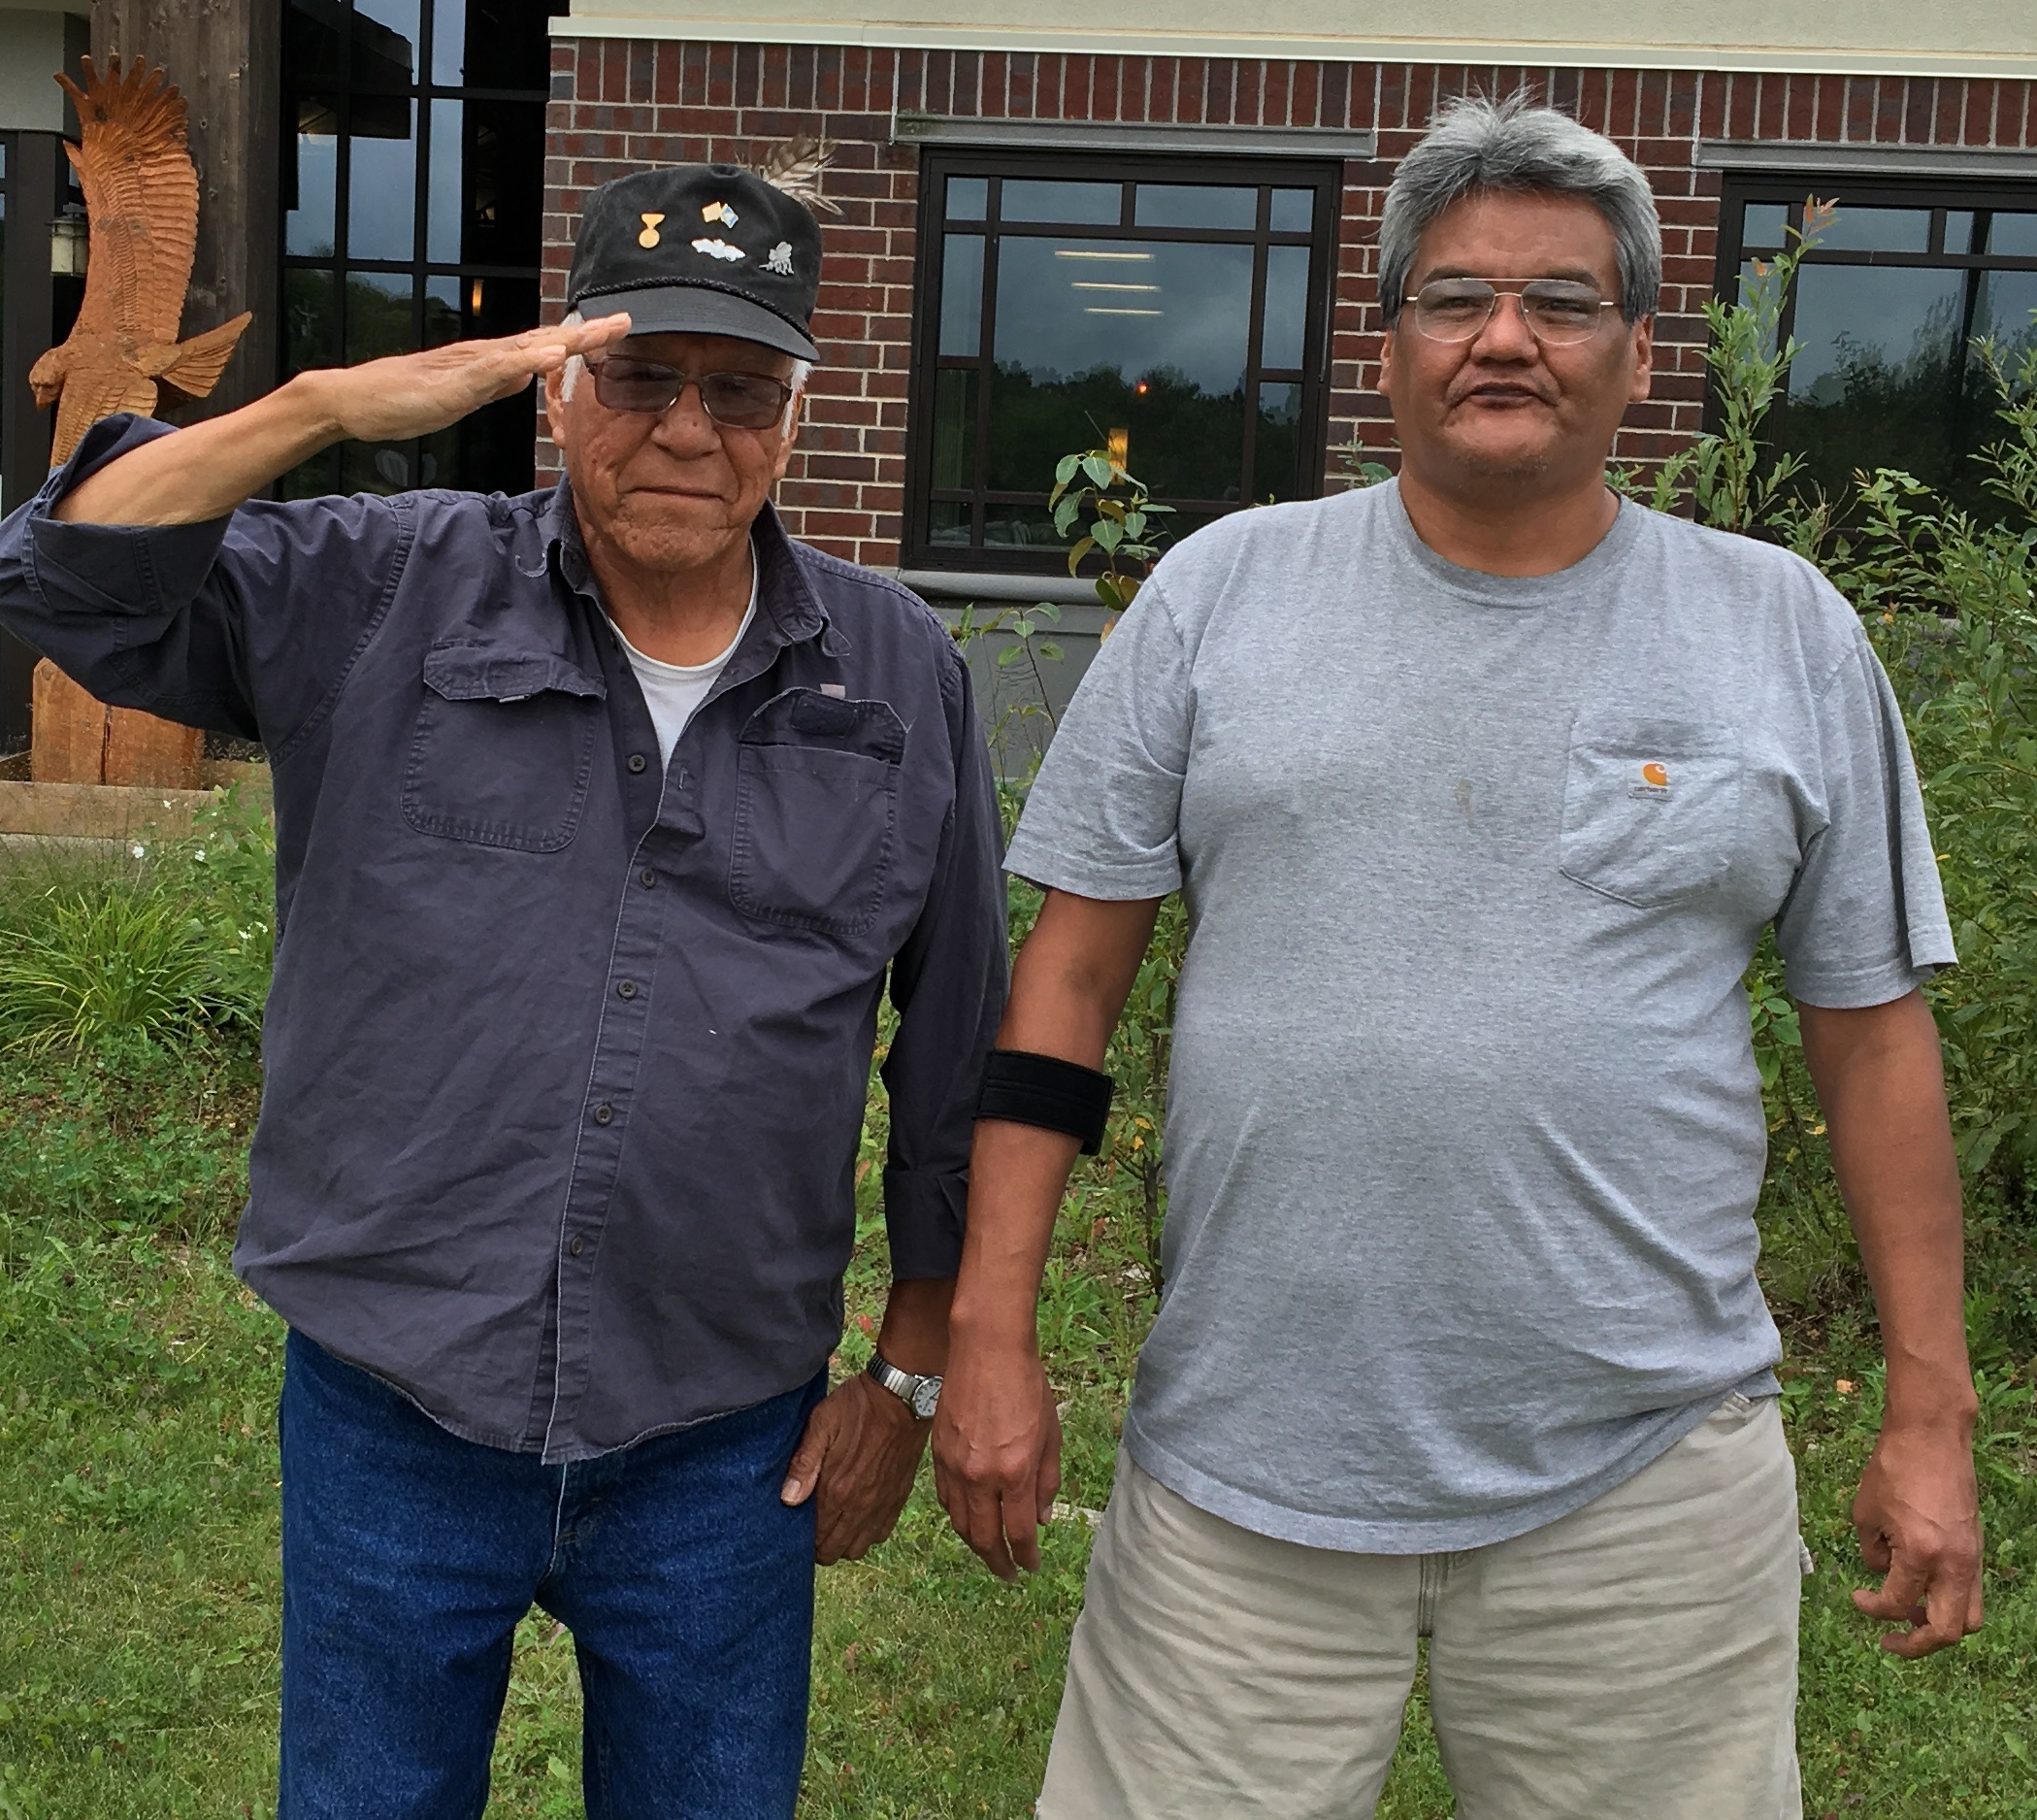 Gene Goodsky and Curt Goodsky standing outside, looking at camera. Gene's right hand is at his hat brim, in salute